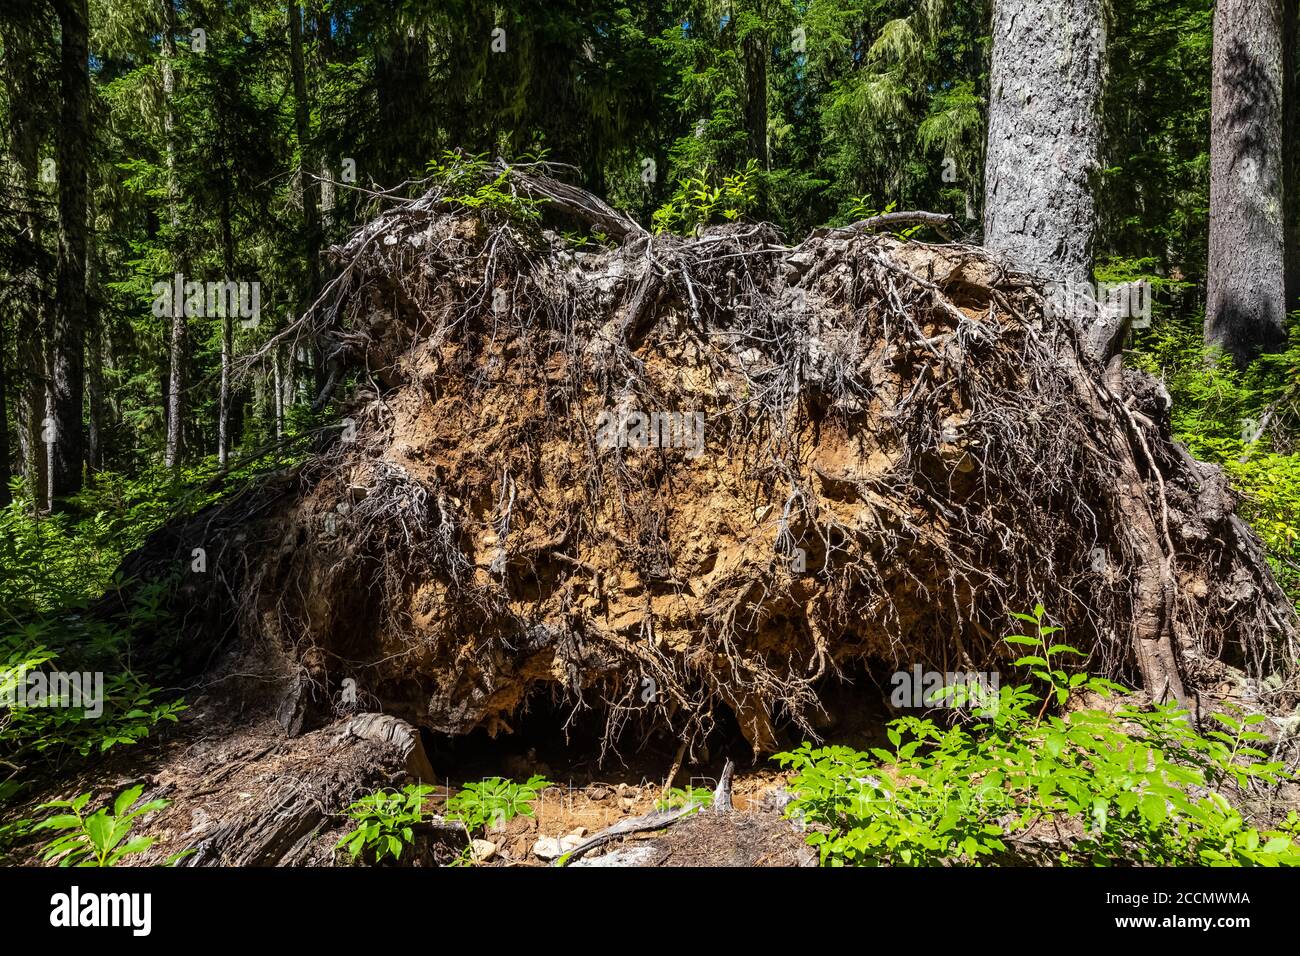 Fallen tree, toppled by high winds, in forest along the Snowgrass Trail in the Goat Rocks Wilderness, Gifford Pinchot National Forest, Washington Stat Stock Photo